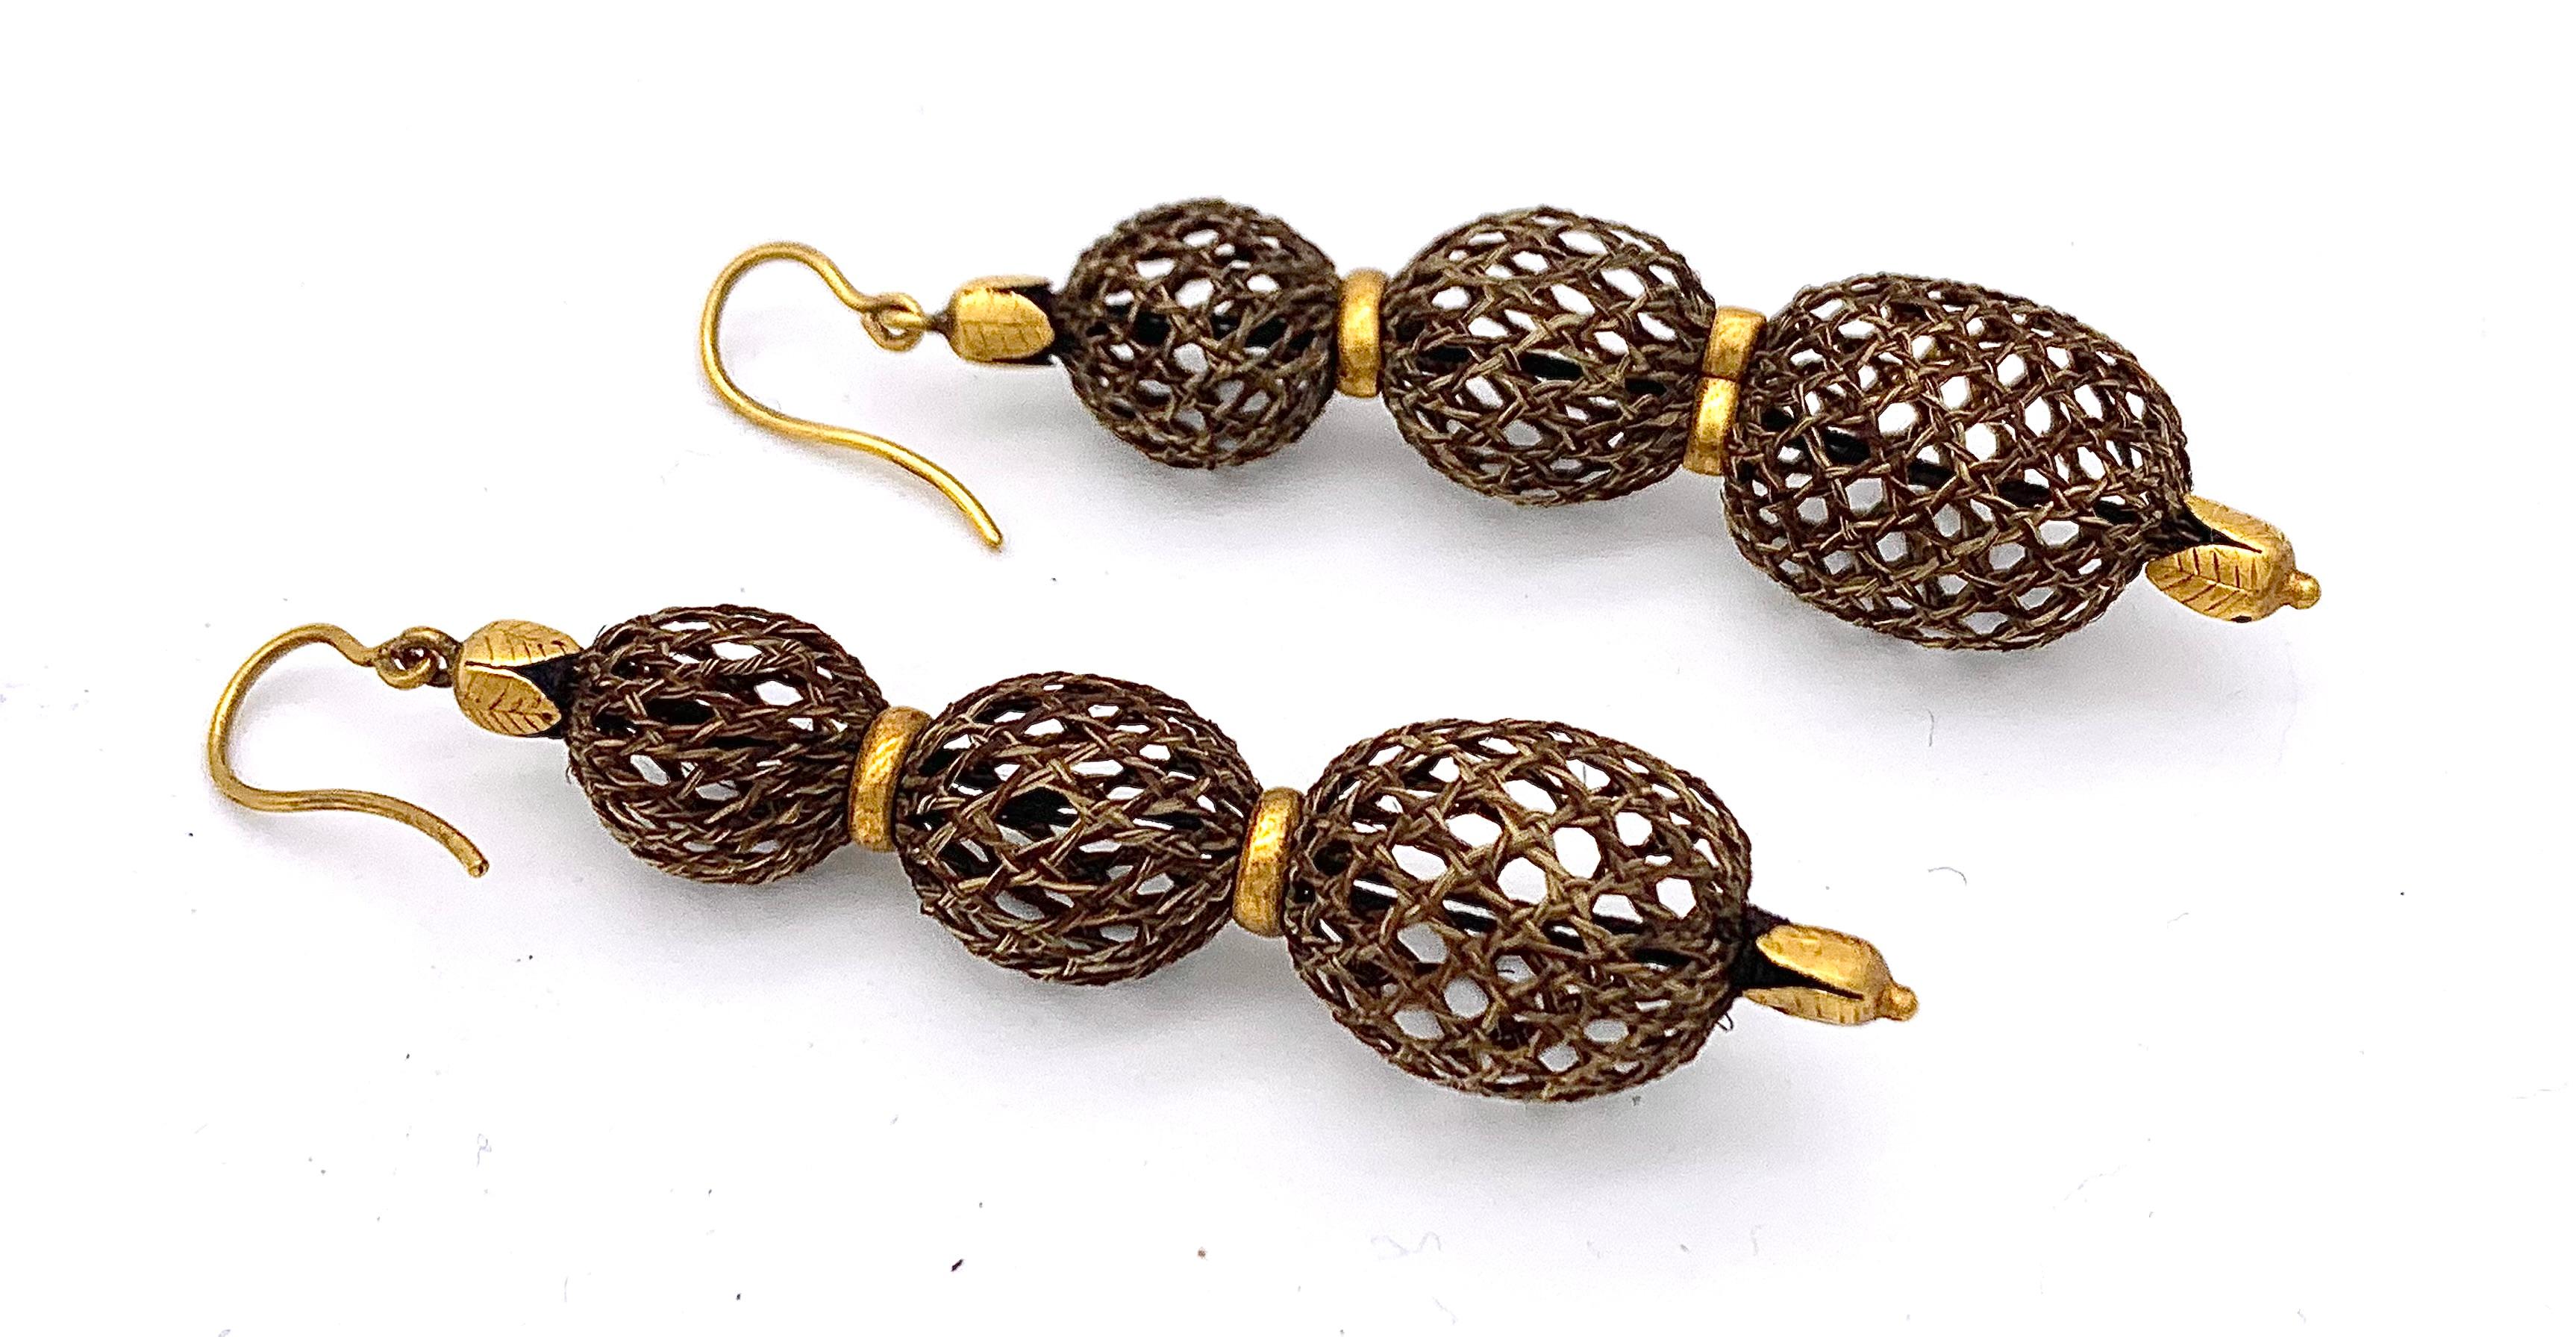 Antique George IV Drop Earrings 14 Karat Gold Woven Hair Leaf Ornaments In Good Condition For Sale In Munich, Bavaria